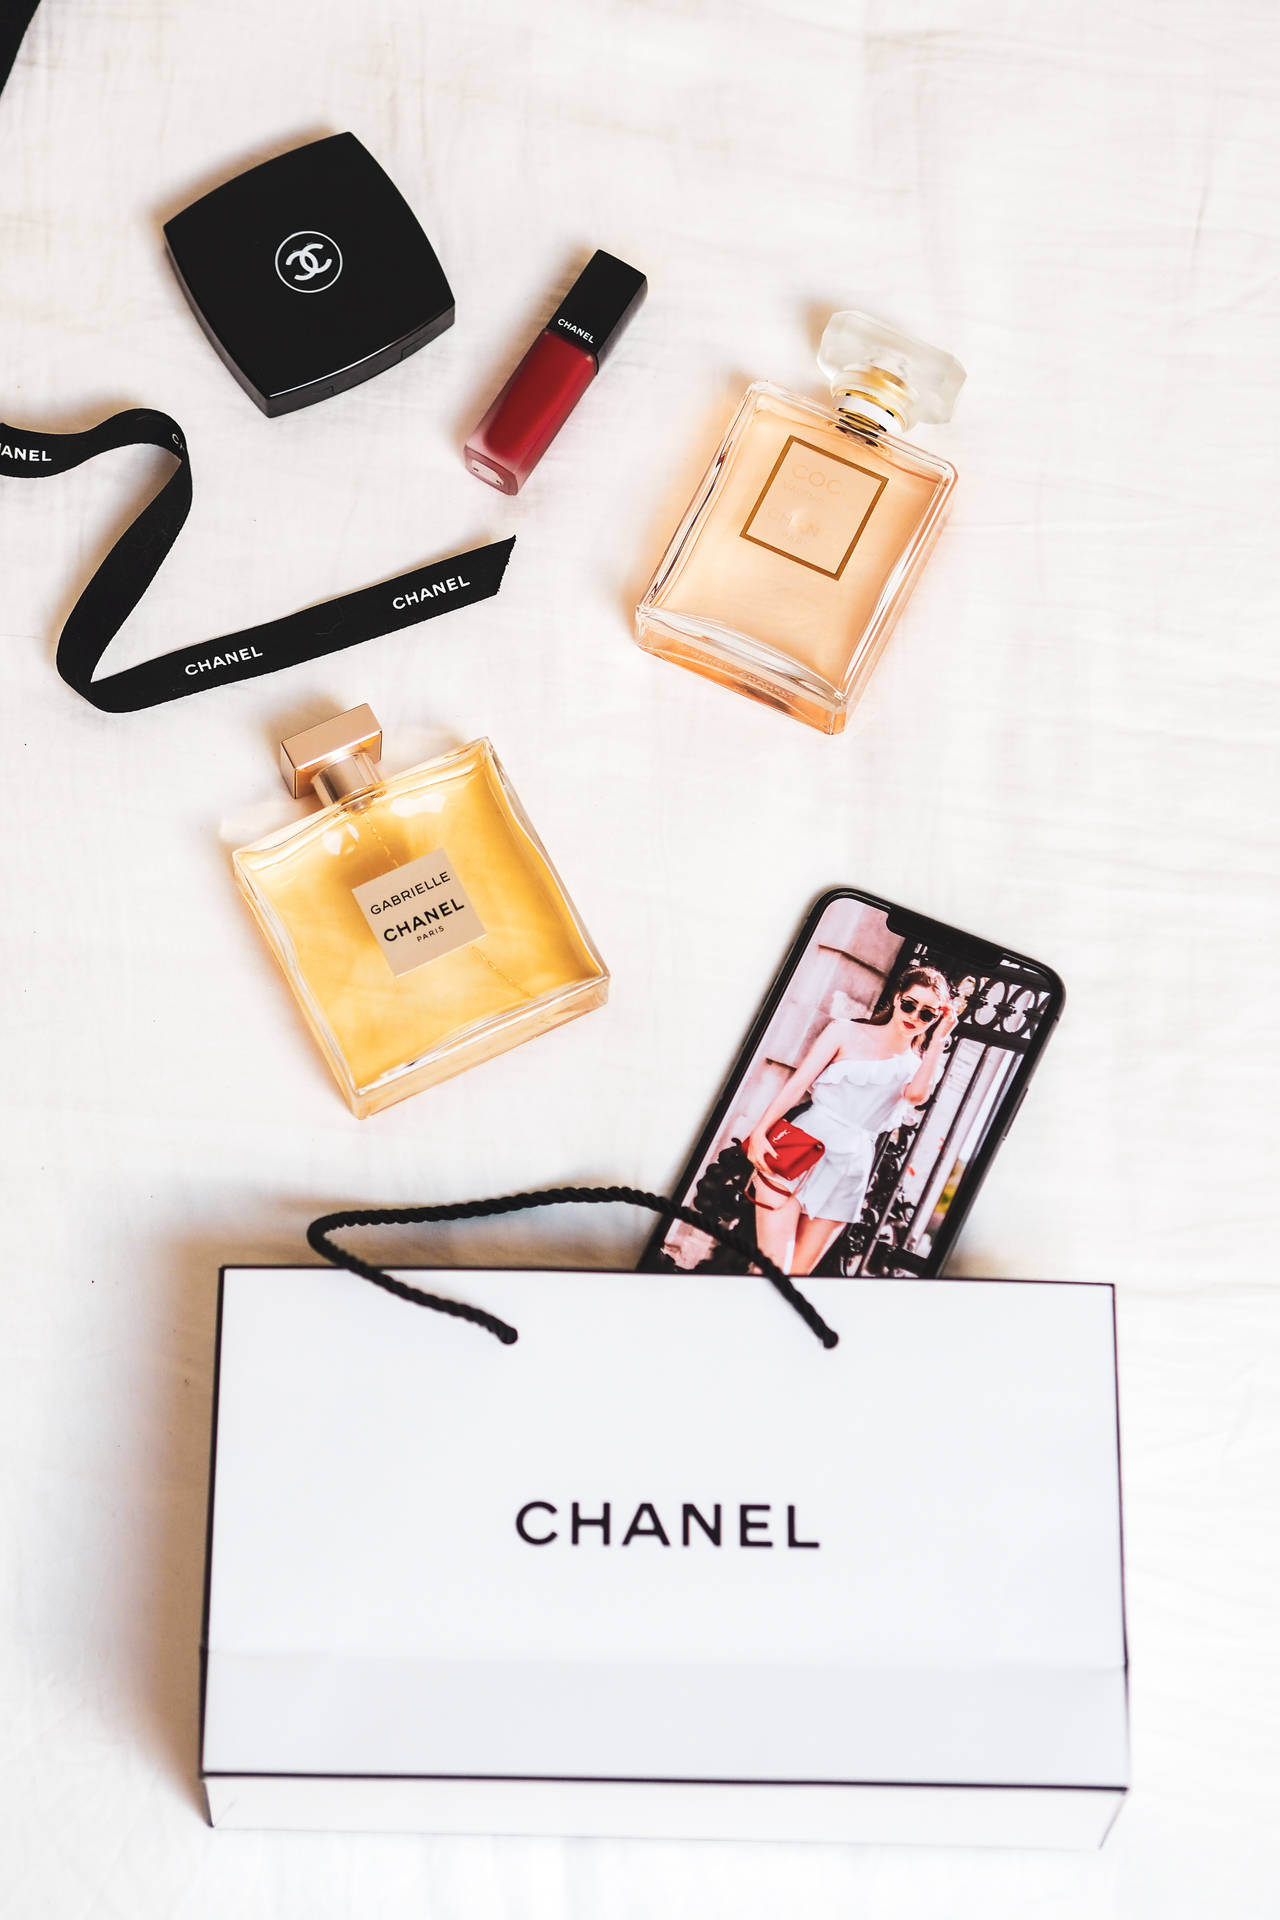 Chanel Aesthetic Products On Bed